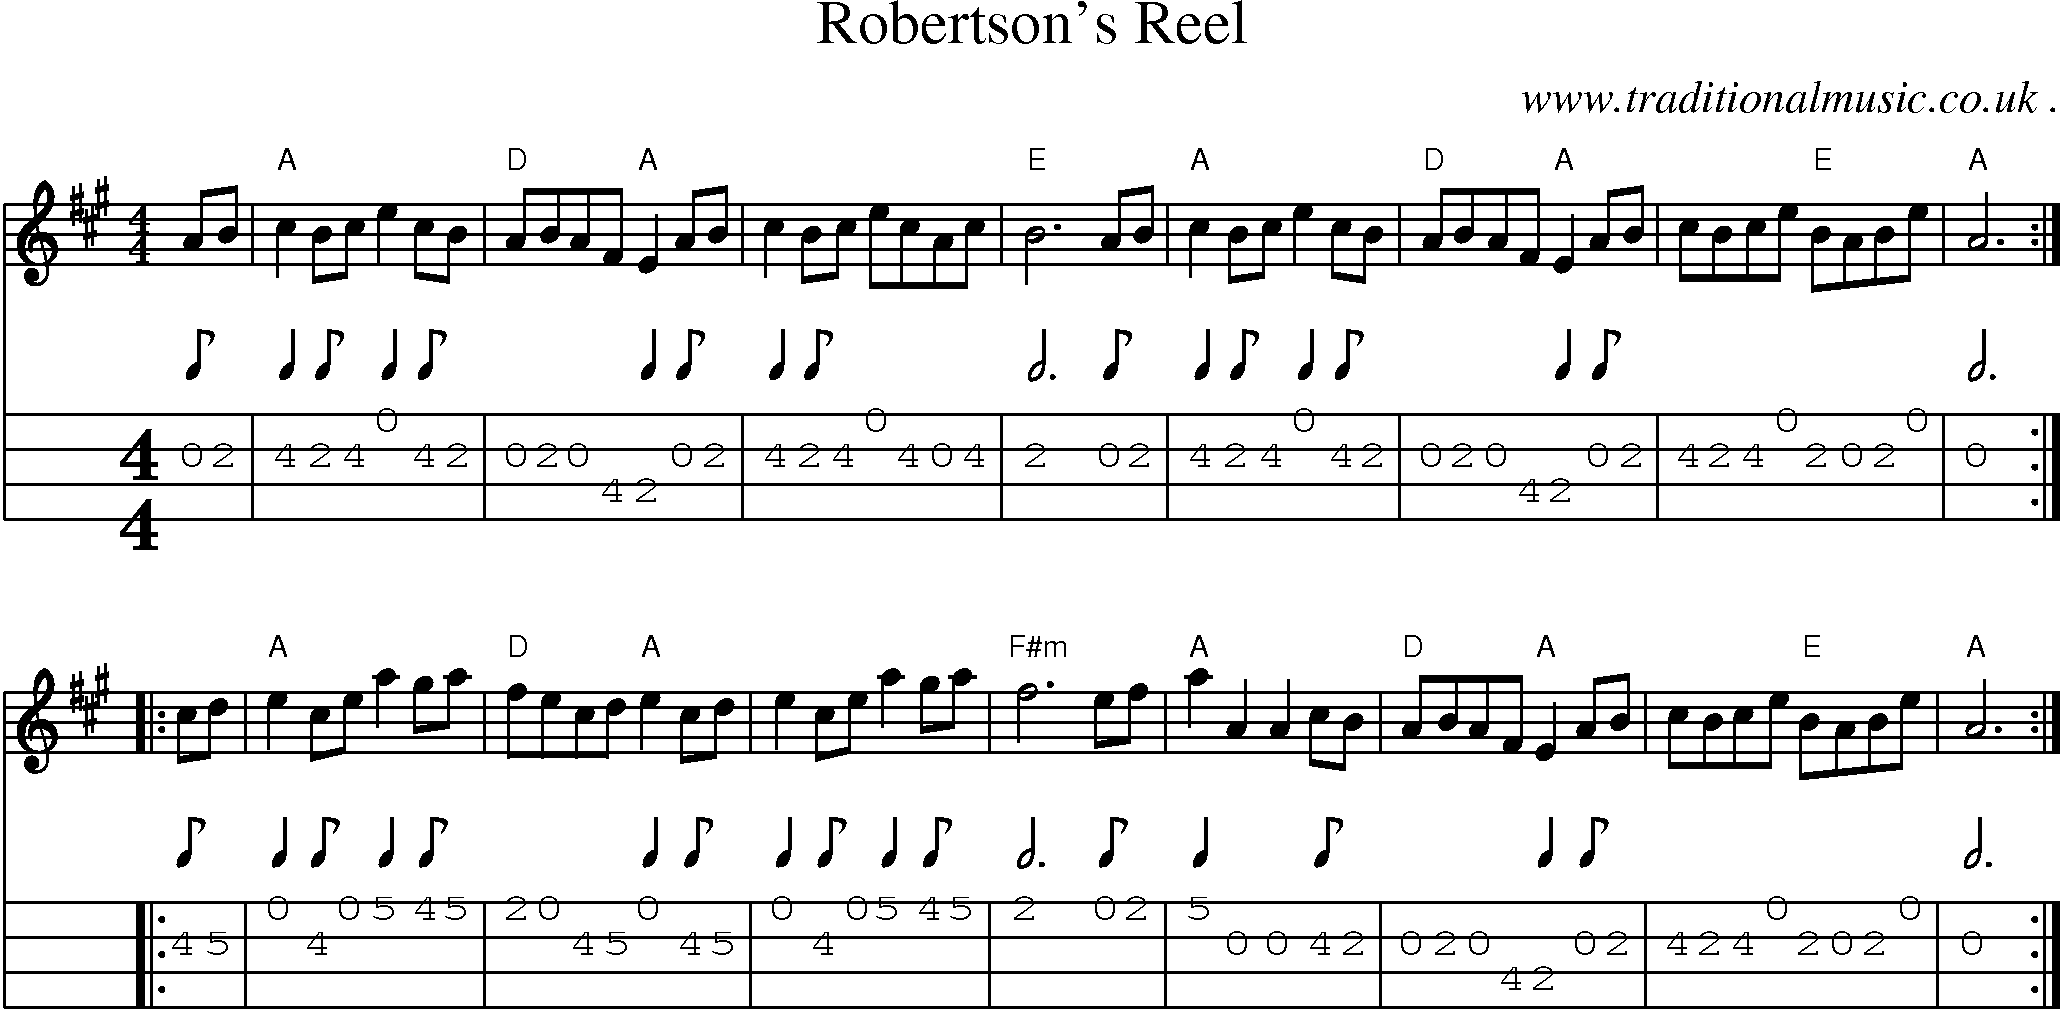 Sheet-music  score, Chords and Mandolin Tabs for Robertsons Reel